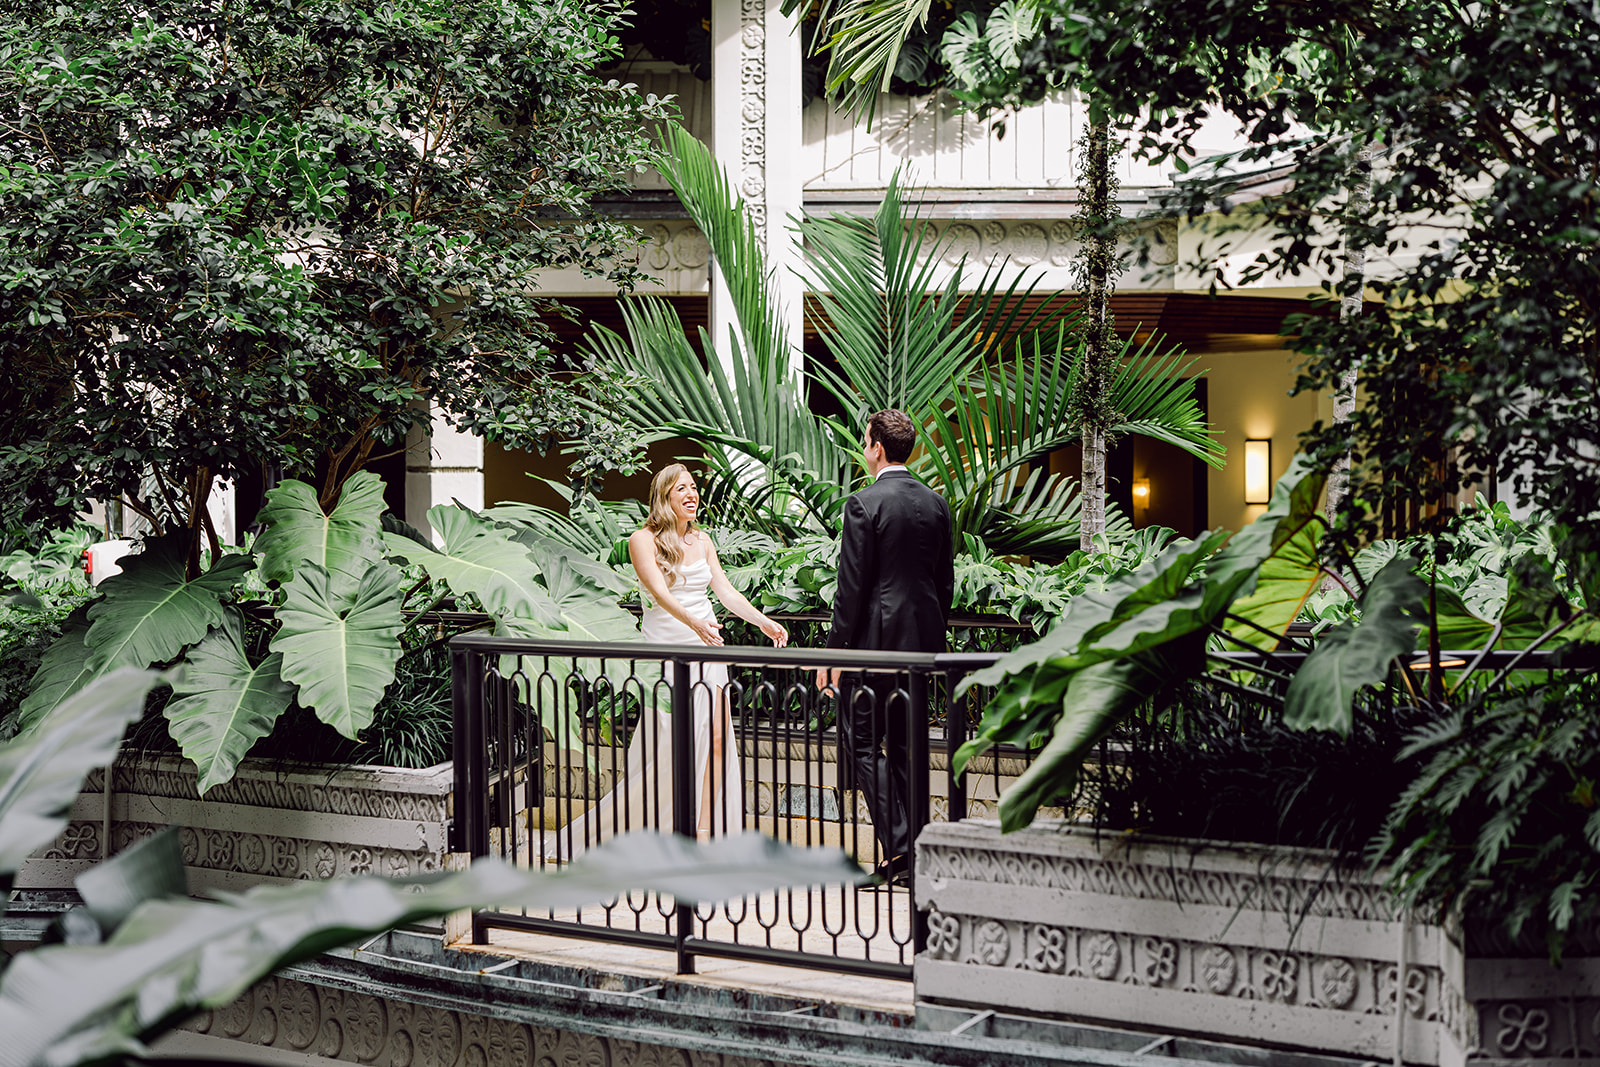 Bride reaches out to groom during first look at Mayfair House Hotel & Garden in Miami on wedding day.